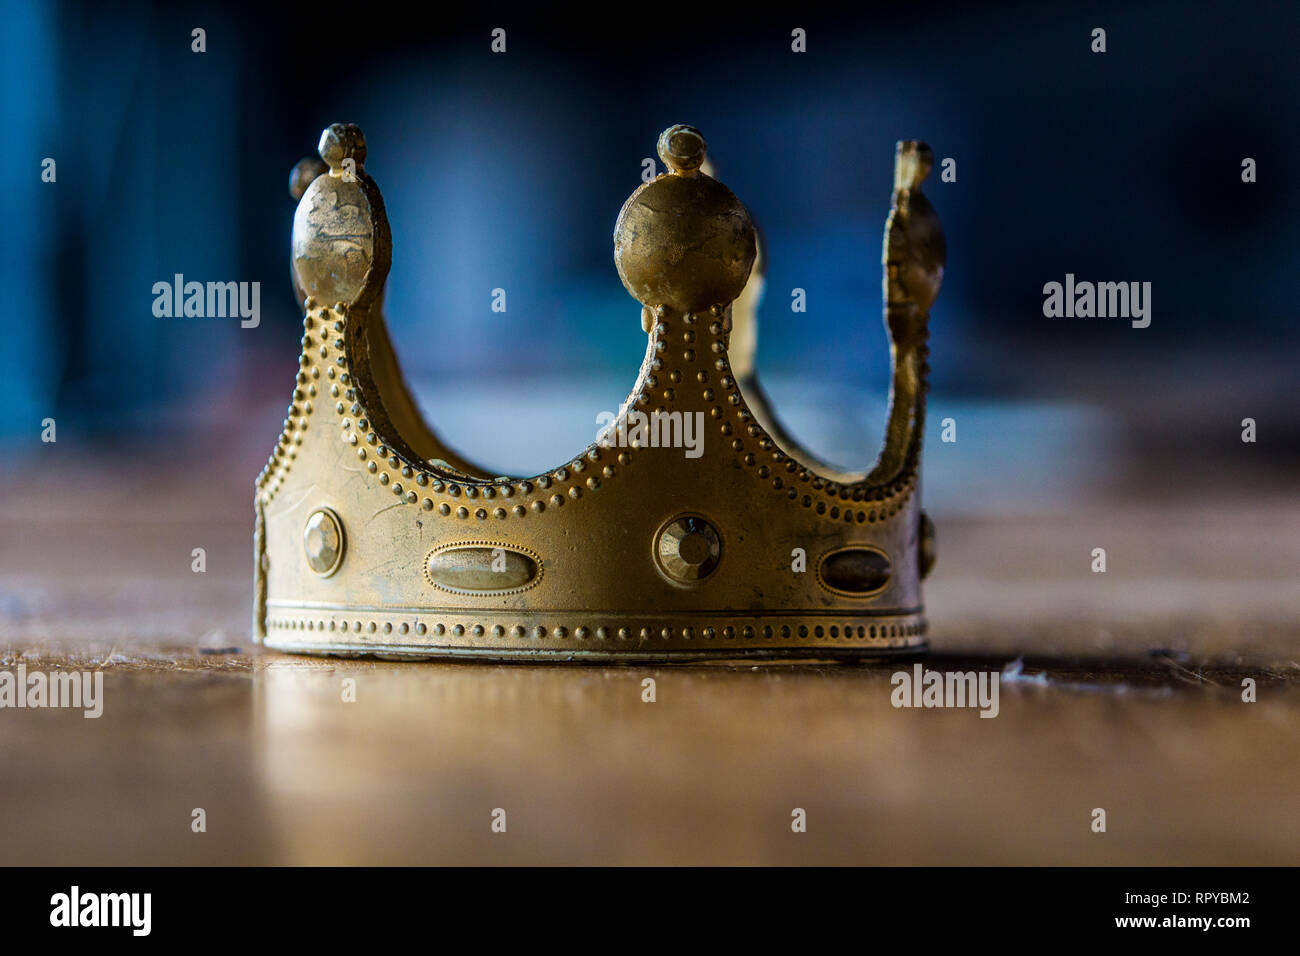 Close up of an isolated  worn out plastic gold-colored  crown which lies on a worn out wooden table with a blue background. Stock Photo